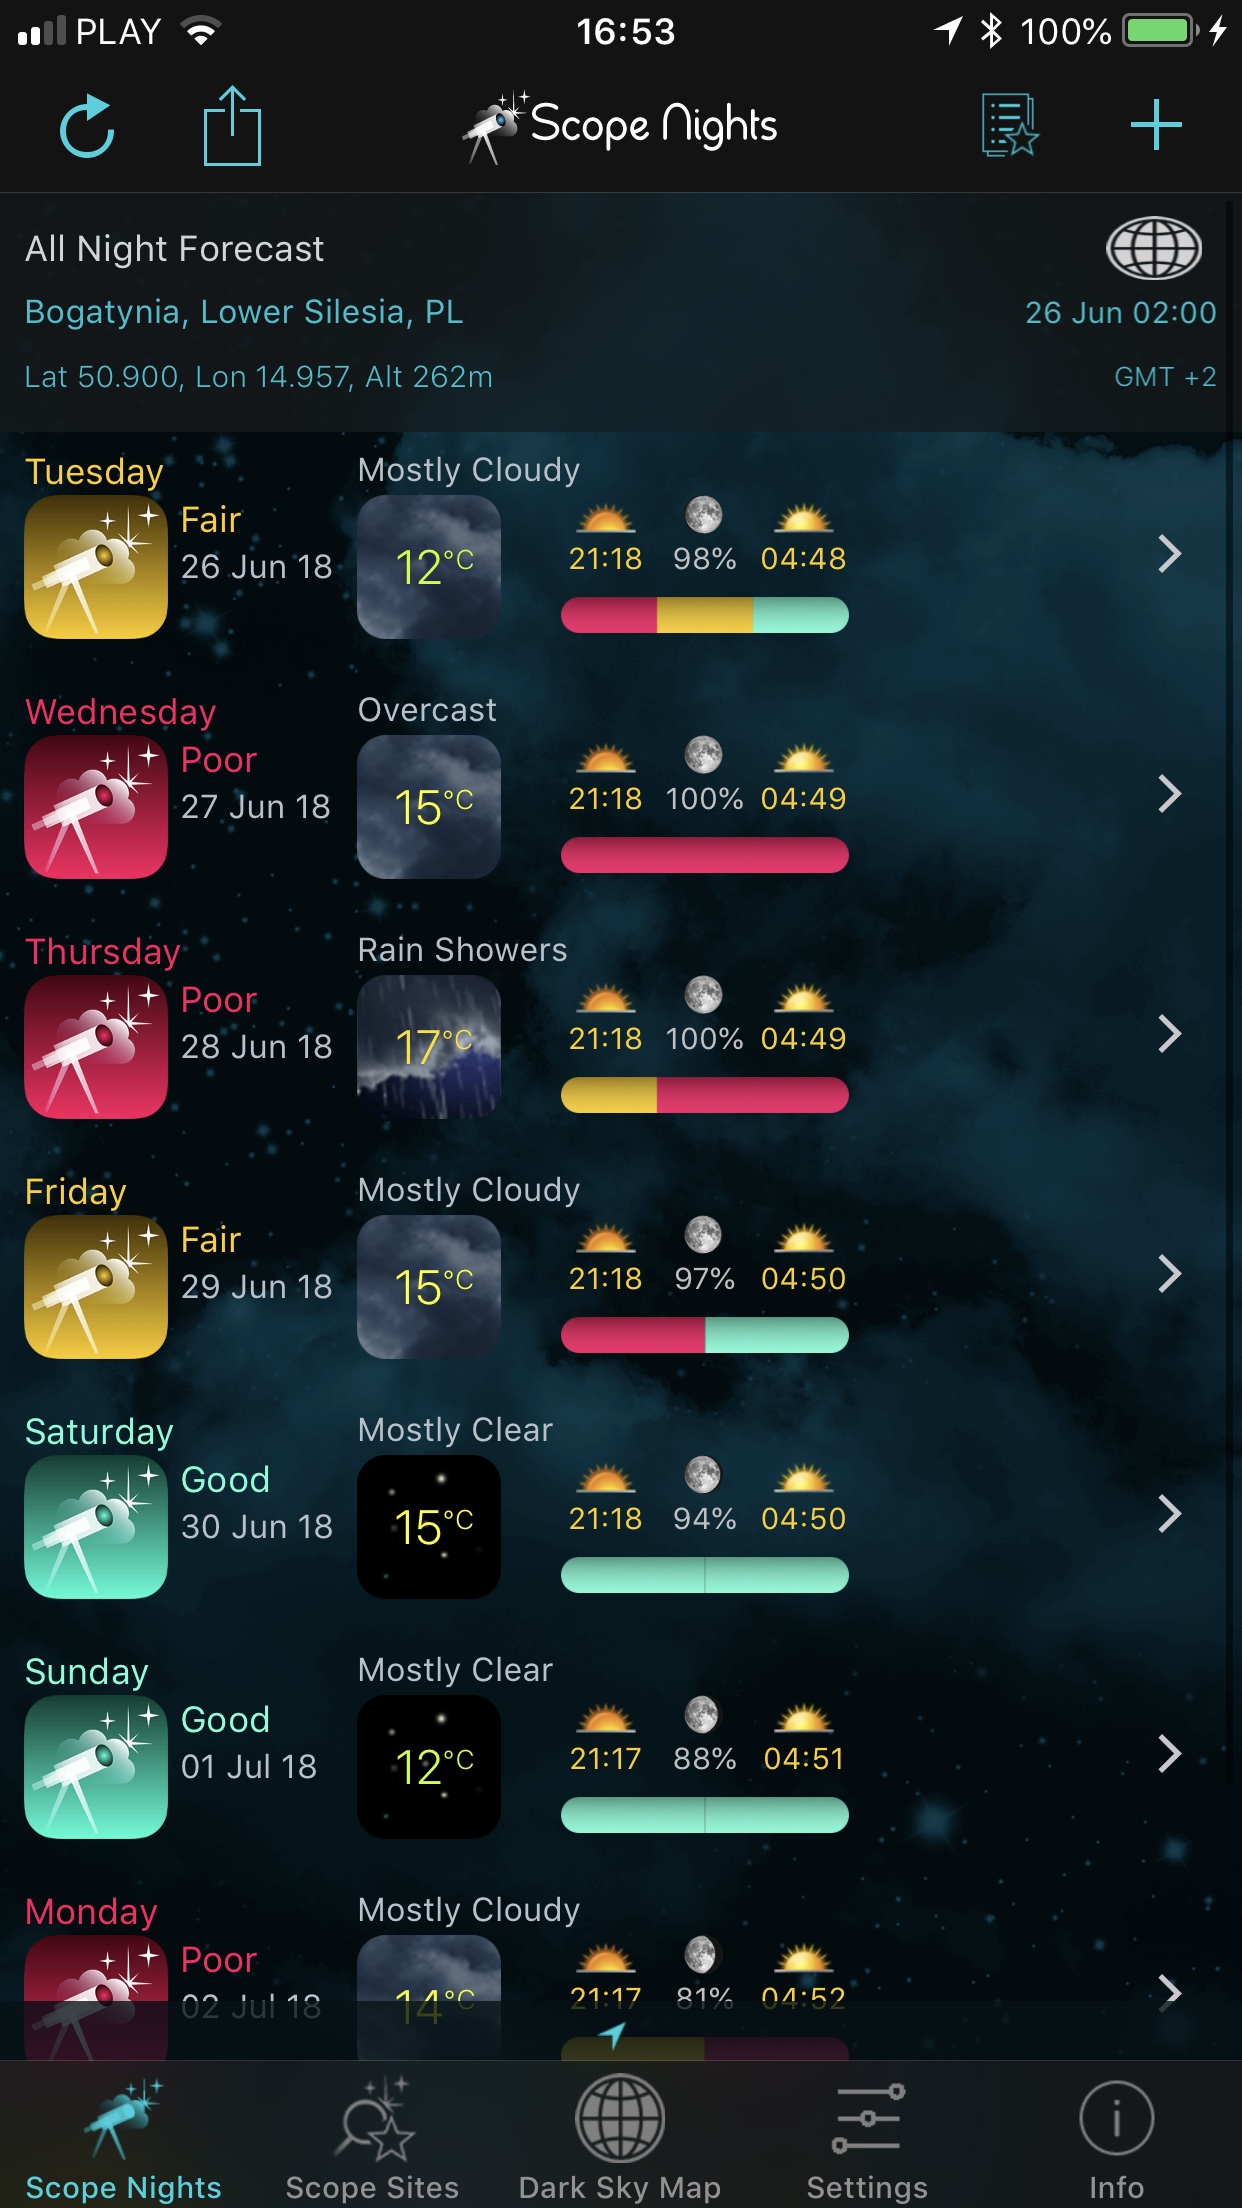 Astronomy and astrophotography weekly conditions forecast in Scope Nights Astronomy Weather iOS app screenshot. One of the best astronomy apps for iPhone.